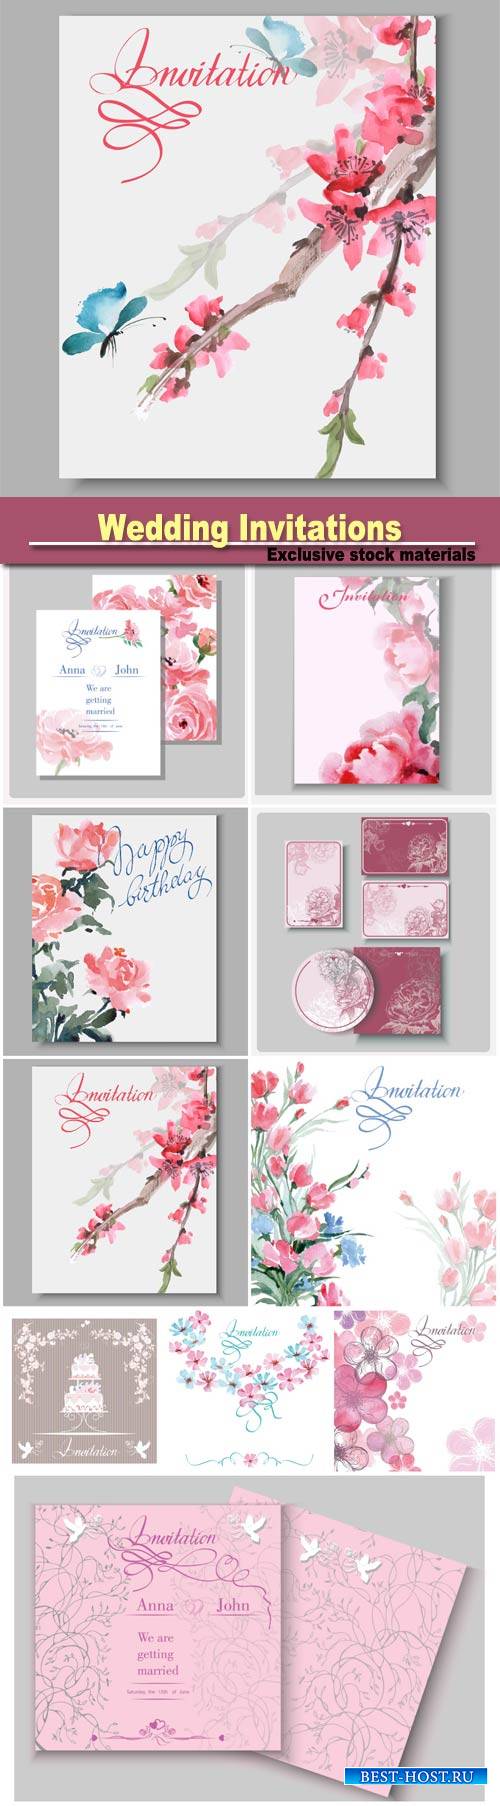 Wedding Invitations with beautiful flowers and butterflies